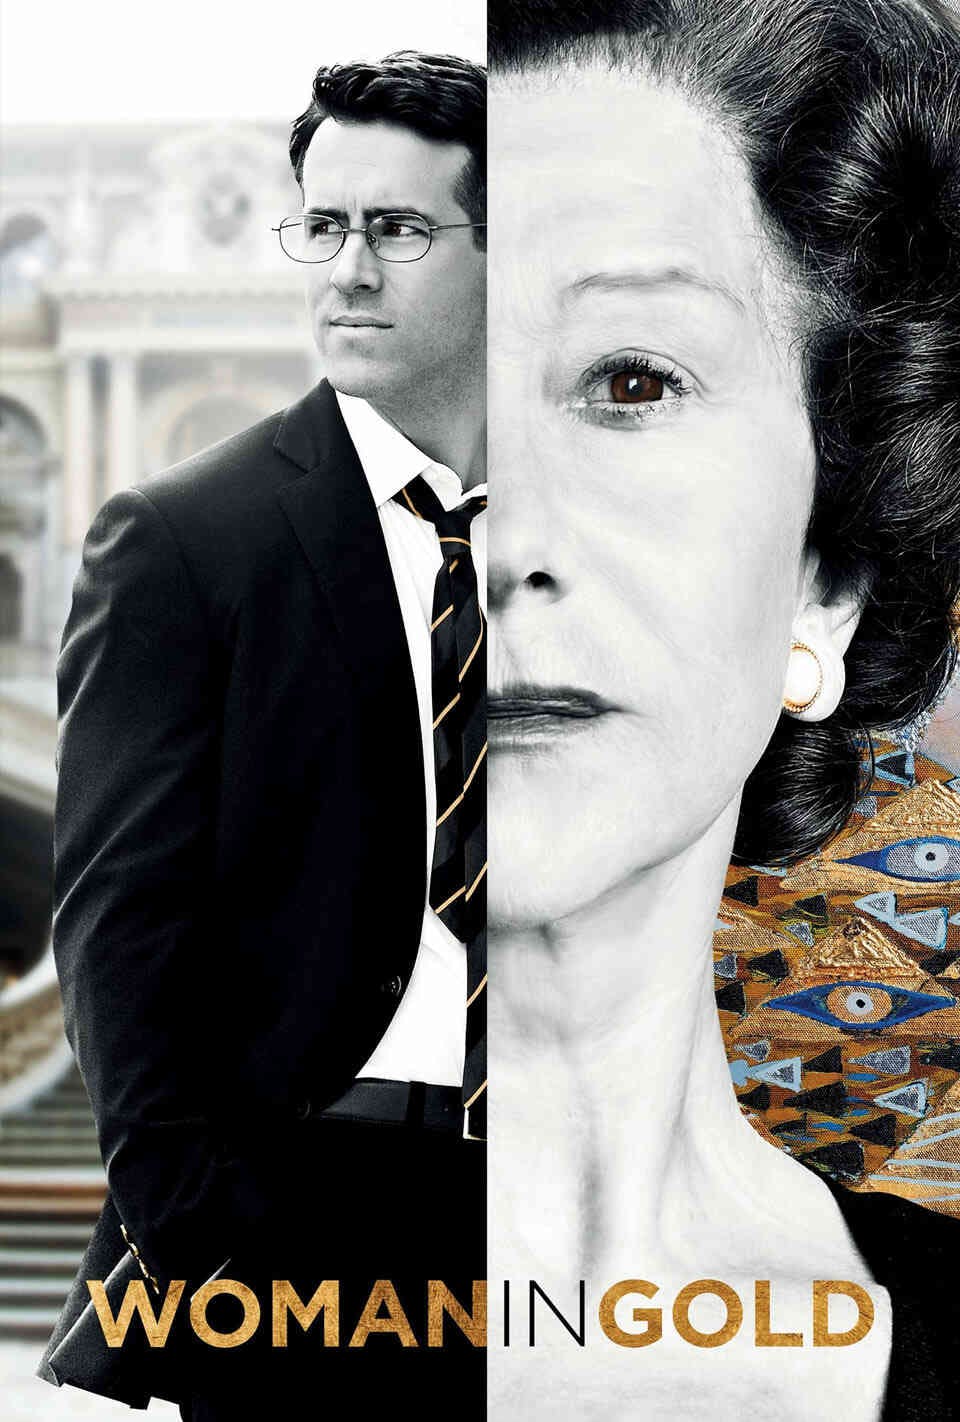 Read Woman in Gold screenplay (poster)